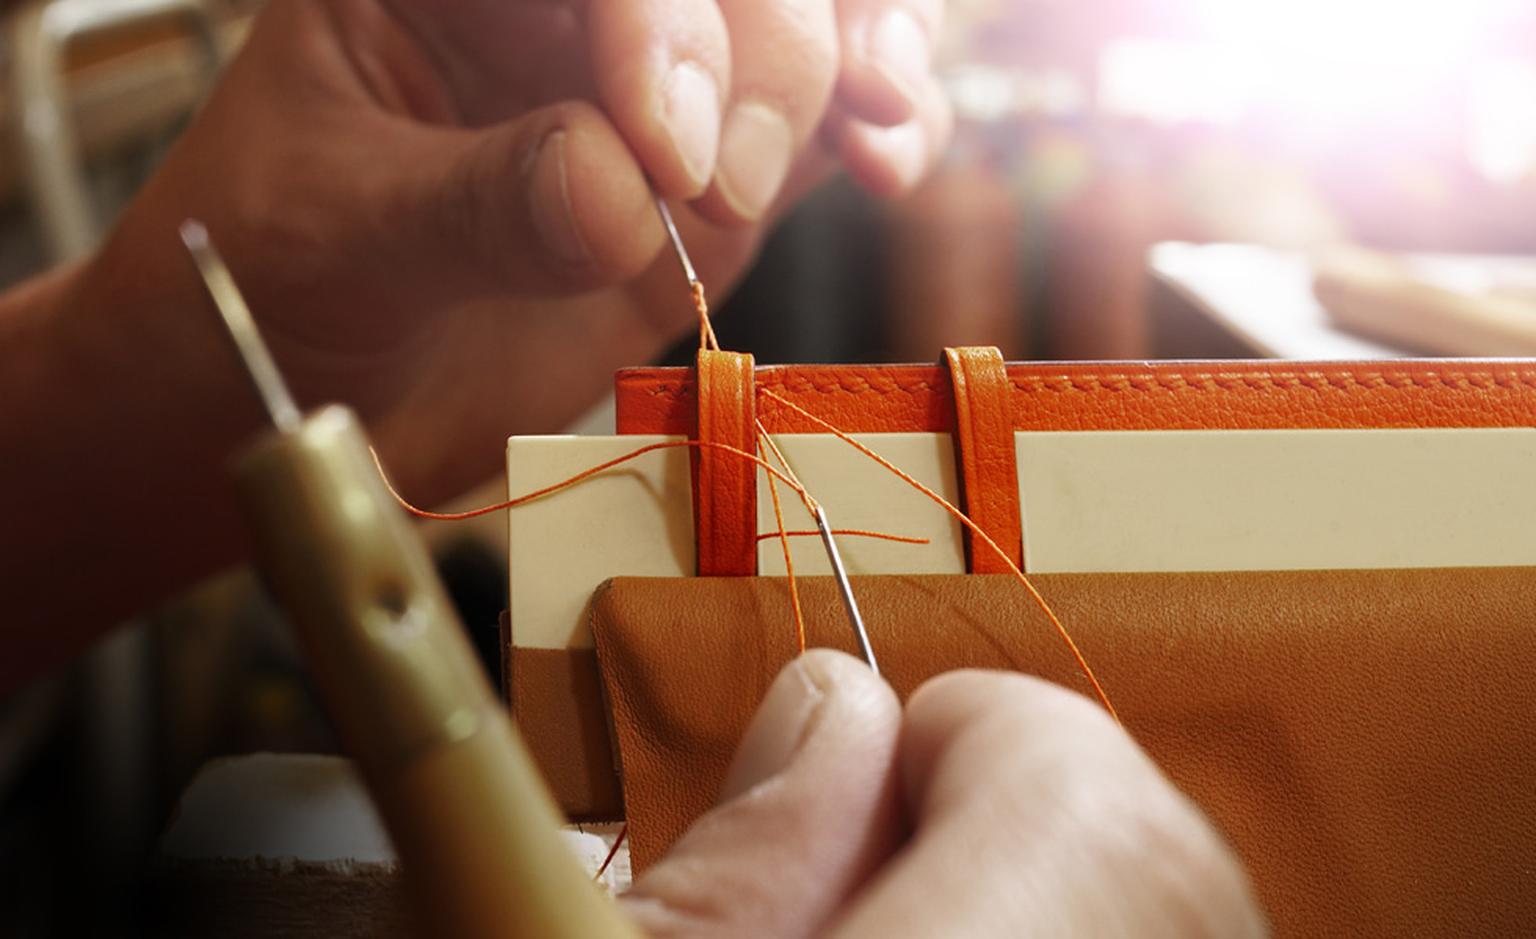 Once the leather has been cut and layered with the inner material and lining, it is sent to another workshop for stitching.